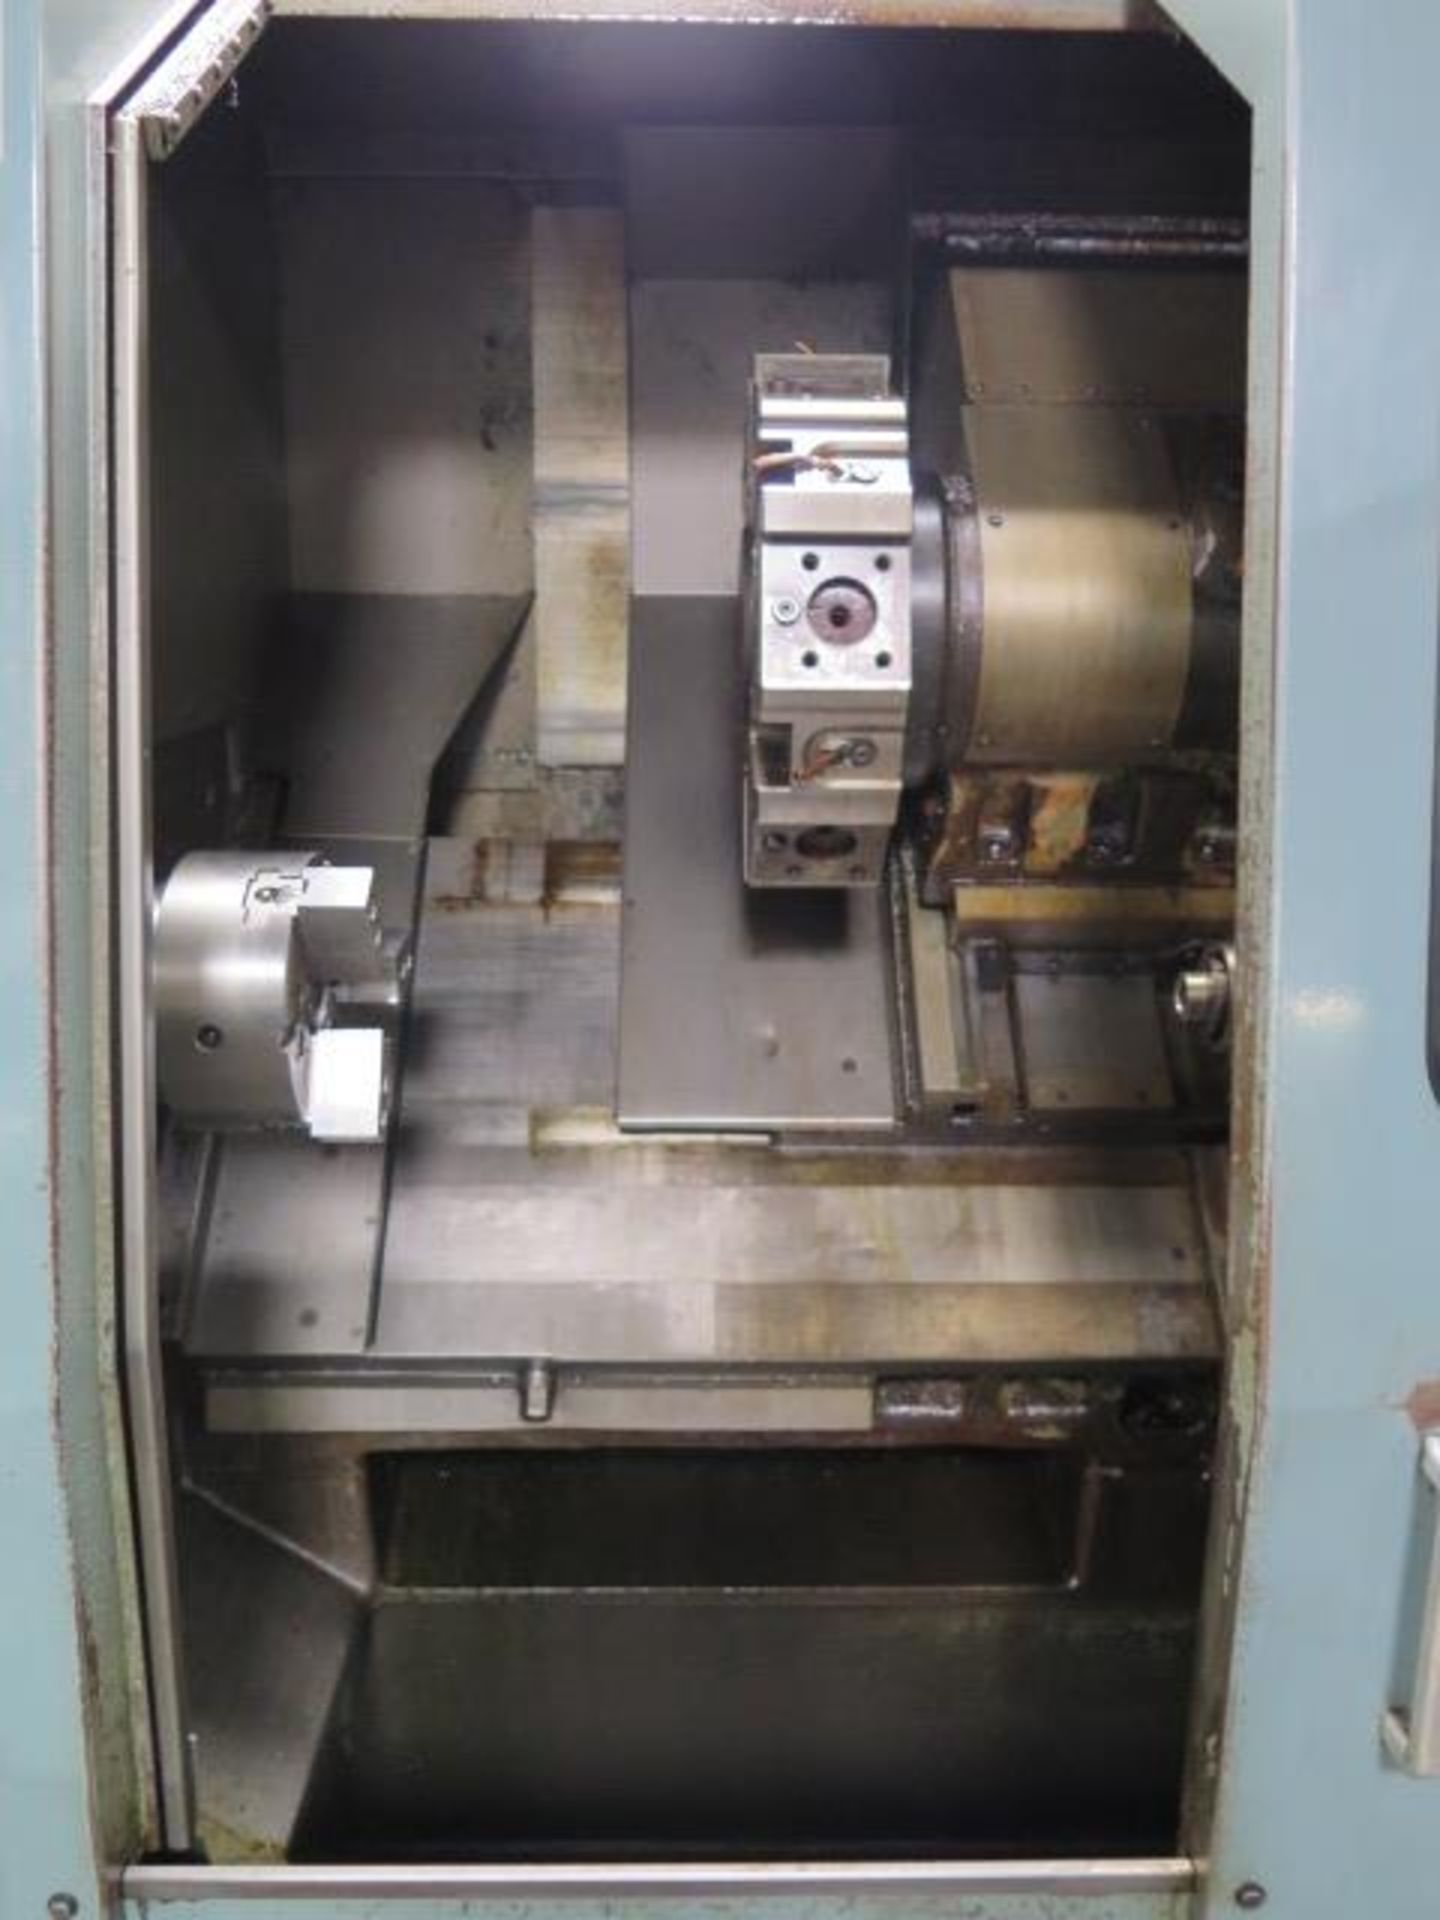 Mori Seiki SL-3A CNC Turning Center s/n 2075 w/ Fanuc 6T Controls, 12-Station Turret, SOLD AS IS - Image 4 of 13